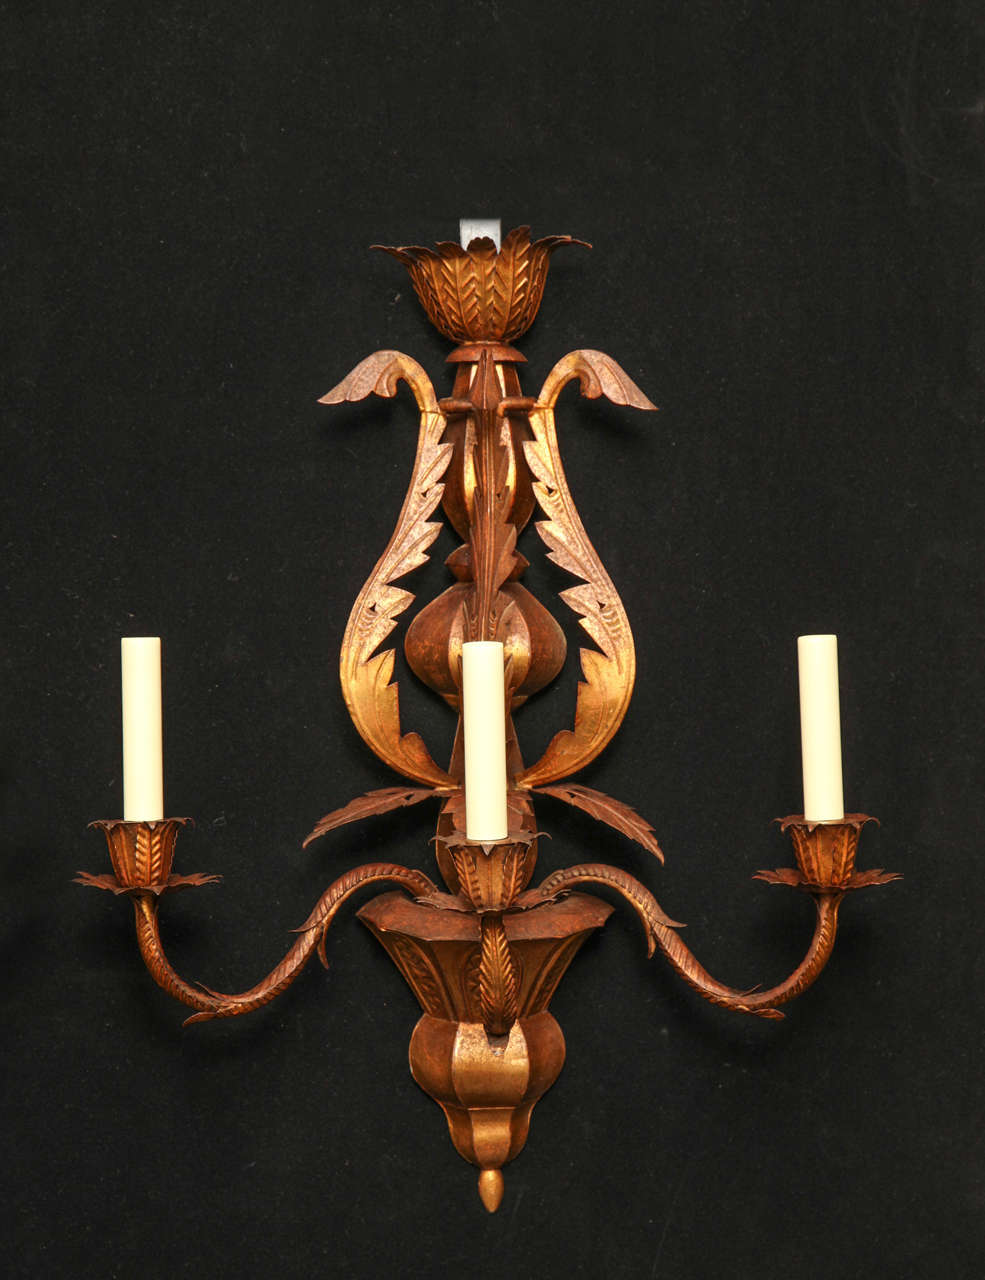 Pair of Gilded Tole Three Light Sconces.  Each Arm Is Supported By A Central Urn.  The Sconces Are Decorated With Exaggerated Acanthus Style Leaves.